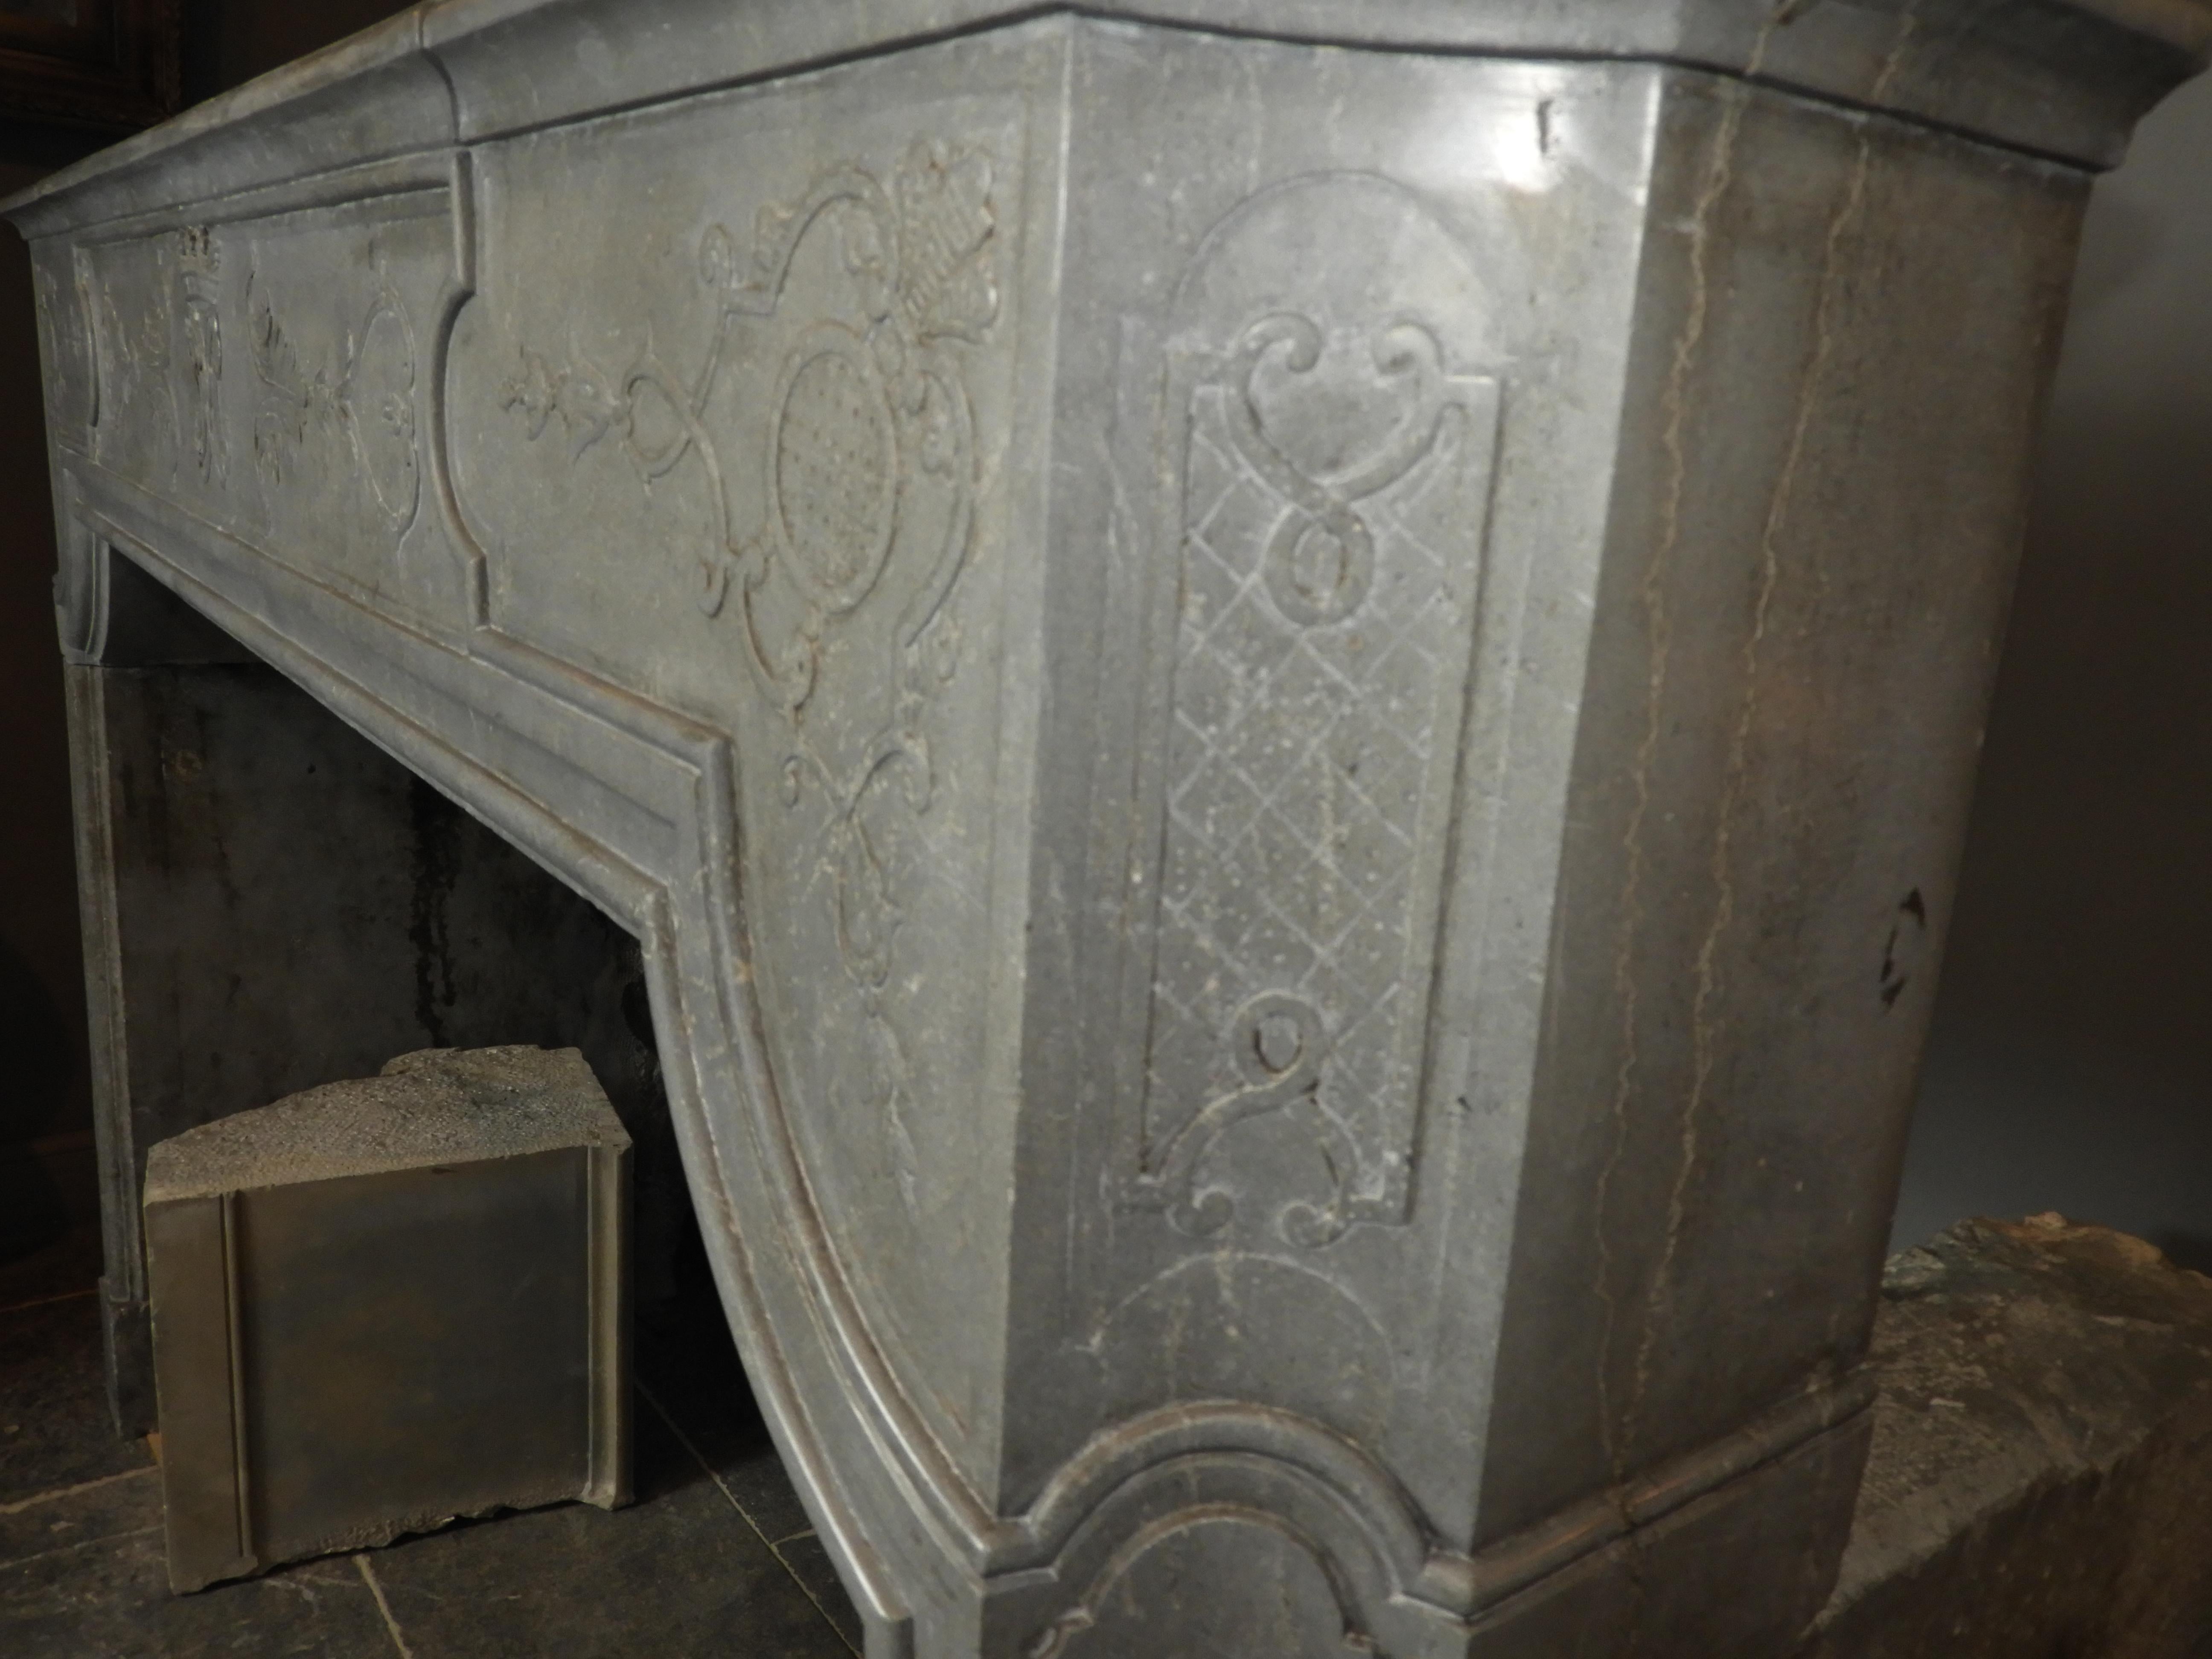 Beautiful Louis XIV fireplace in solid grey limestone, very nice and detailed decoration.
The fireplace has an interior size of 124.5 cm wide and 86 cm high.